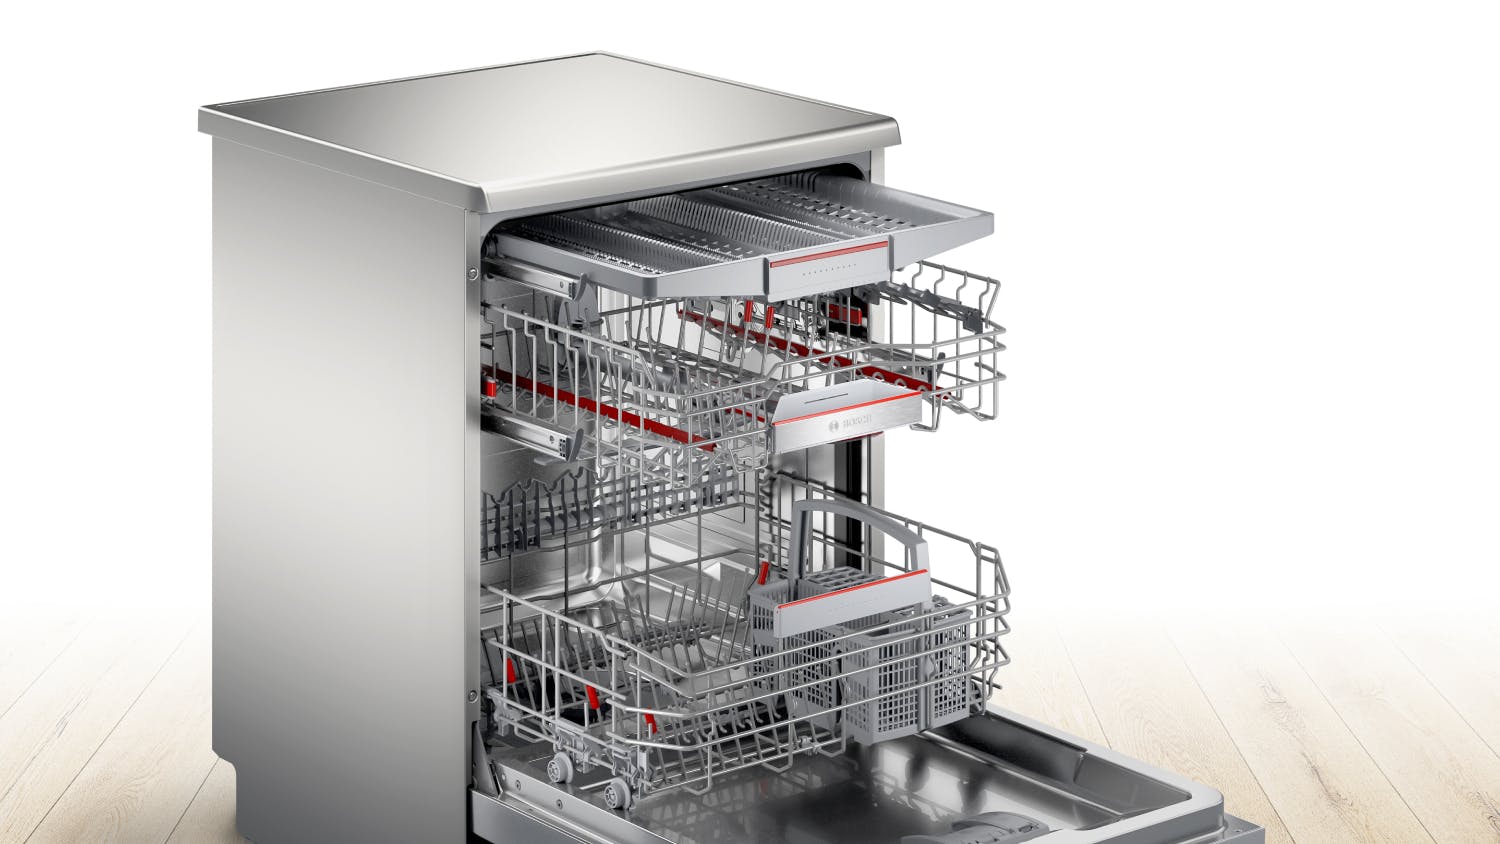 Bosch 15 Place Setting 9 Program Freestanding Dishwasher - Silver (Series 6/SMS6HCI01A)